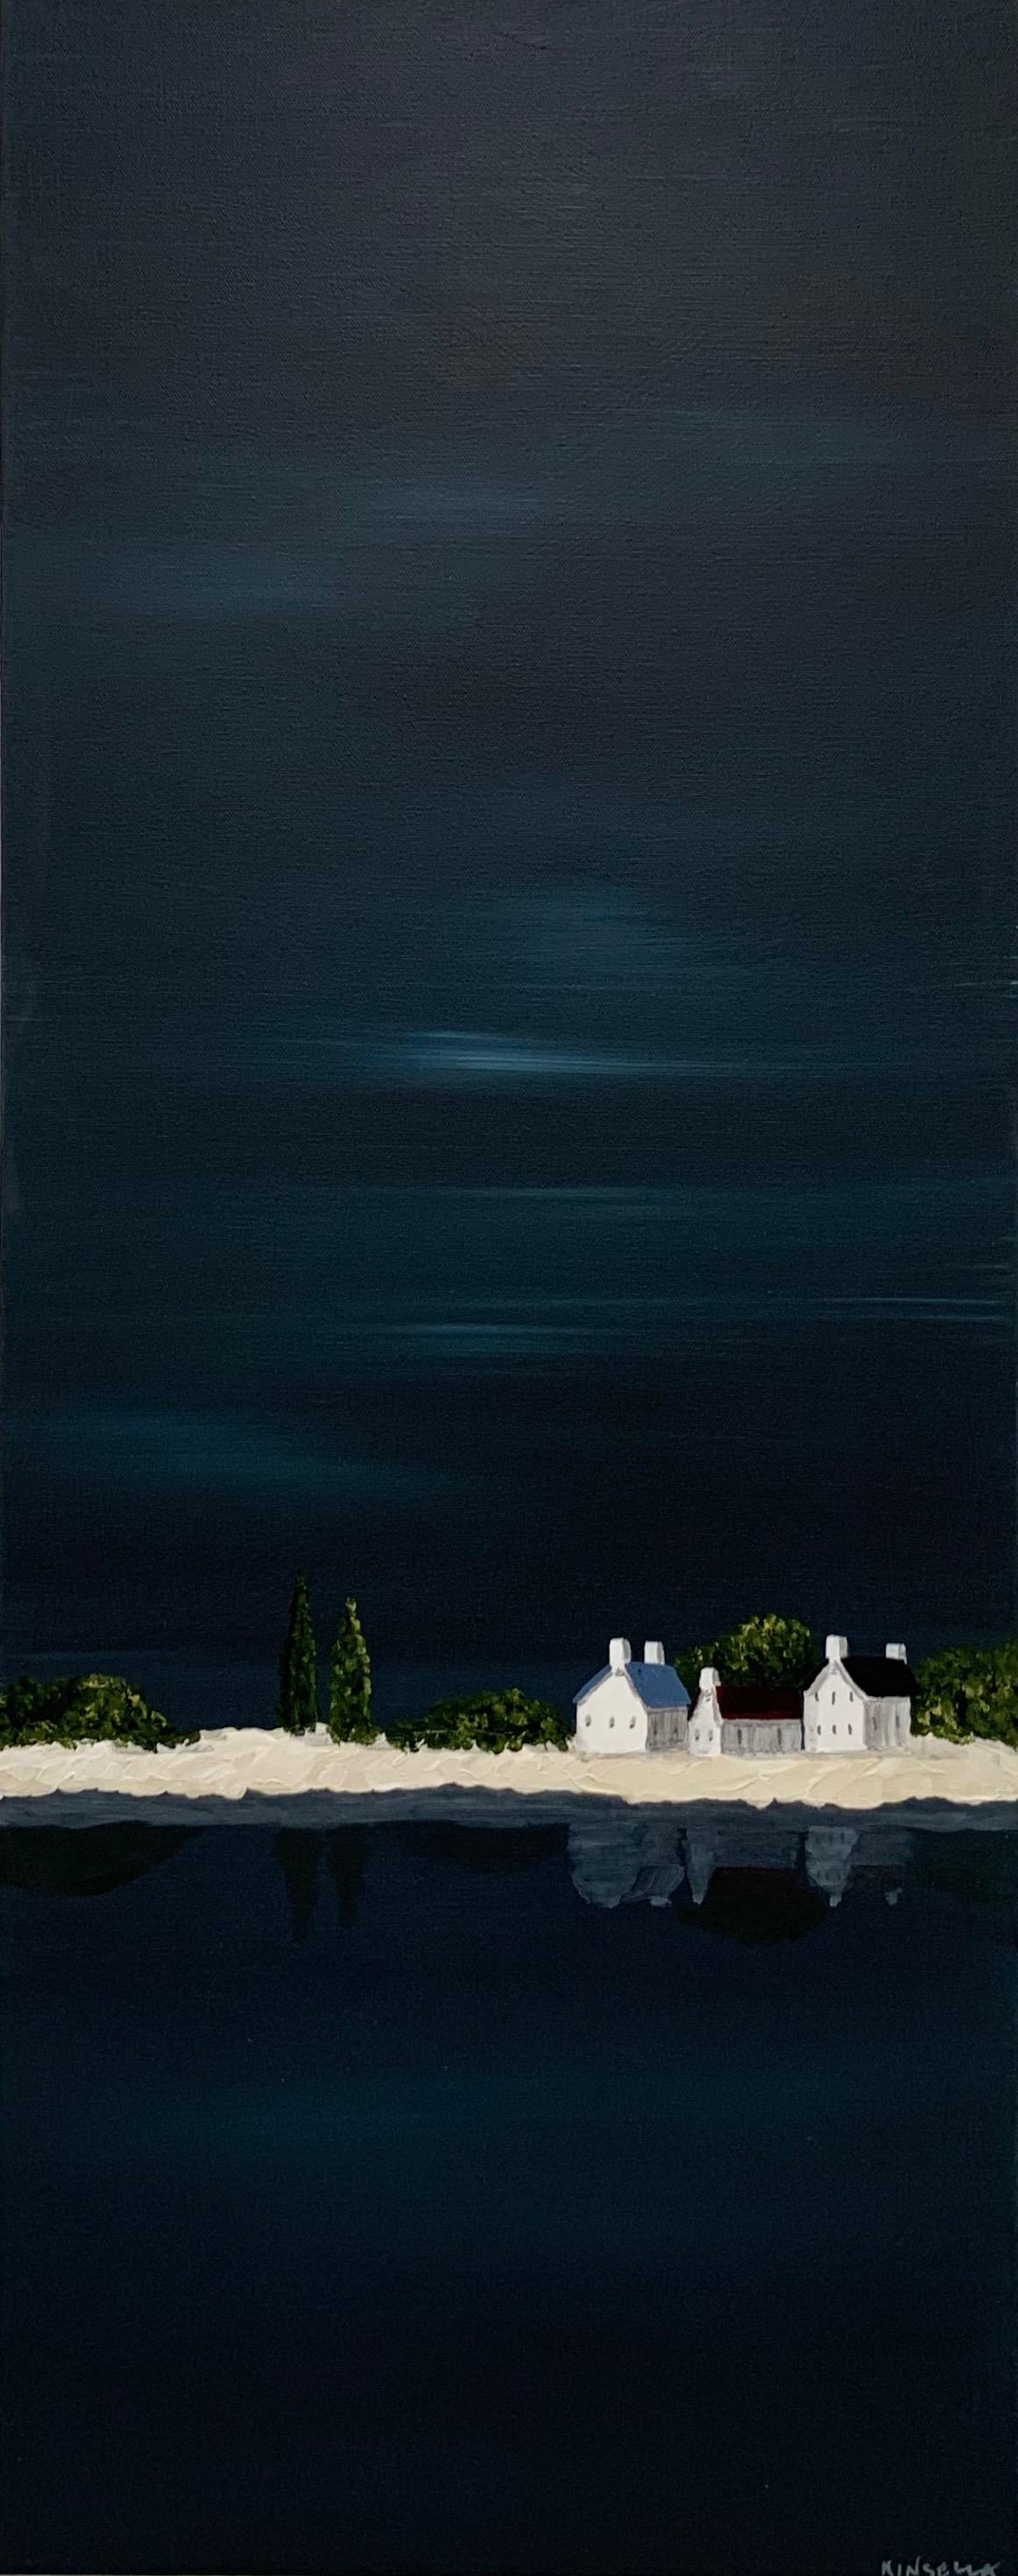 'Hamlet Reflected' is a tall and narrow contemporary minimalist acrylic on canvas coastal painting of vertical format, created by American artist Susan Kinsella in 2019. Featuring a strong palette made of dark blue, black, beige, white and dark